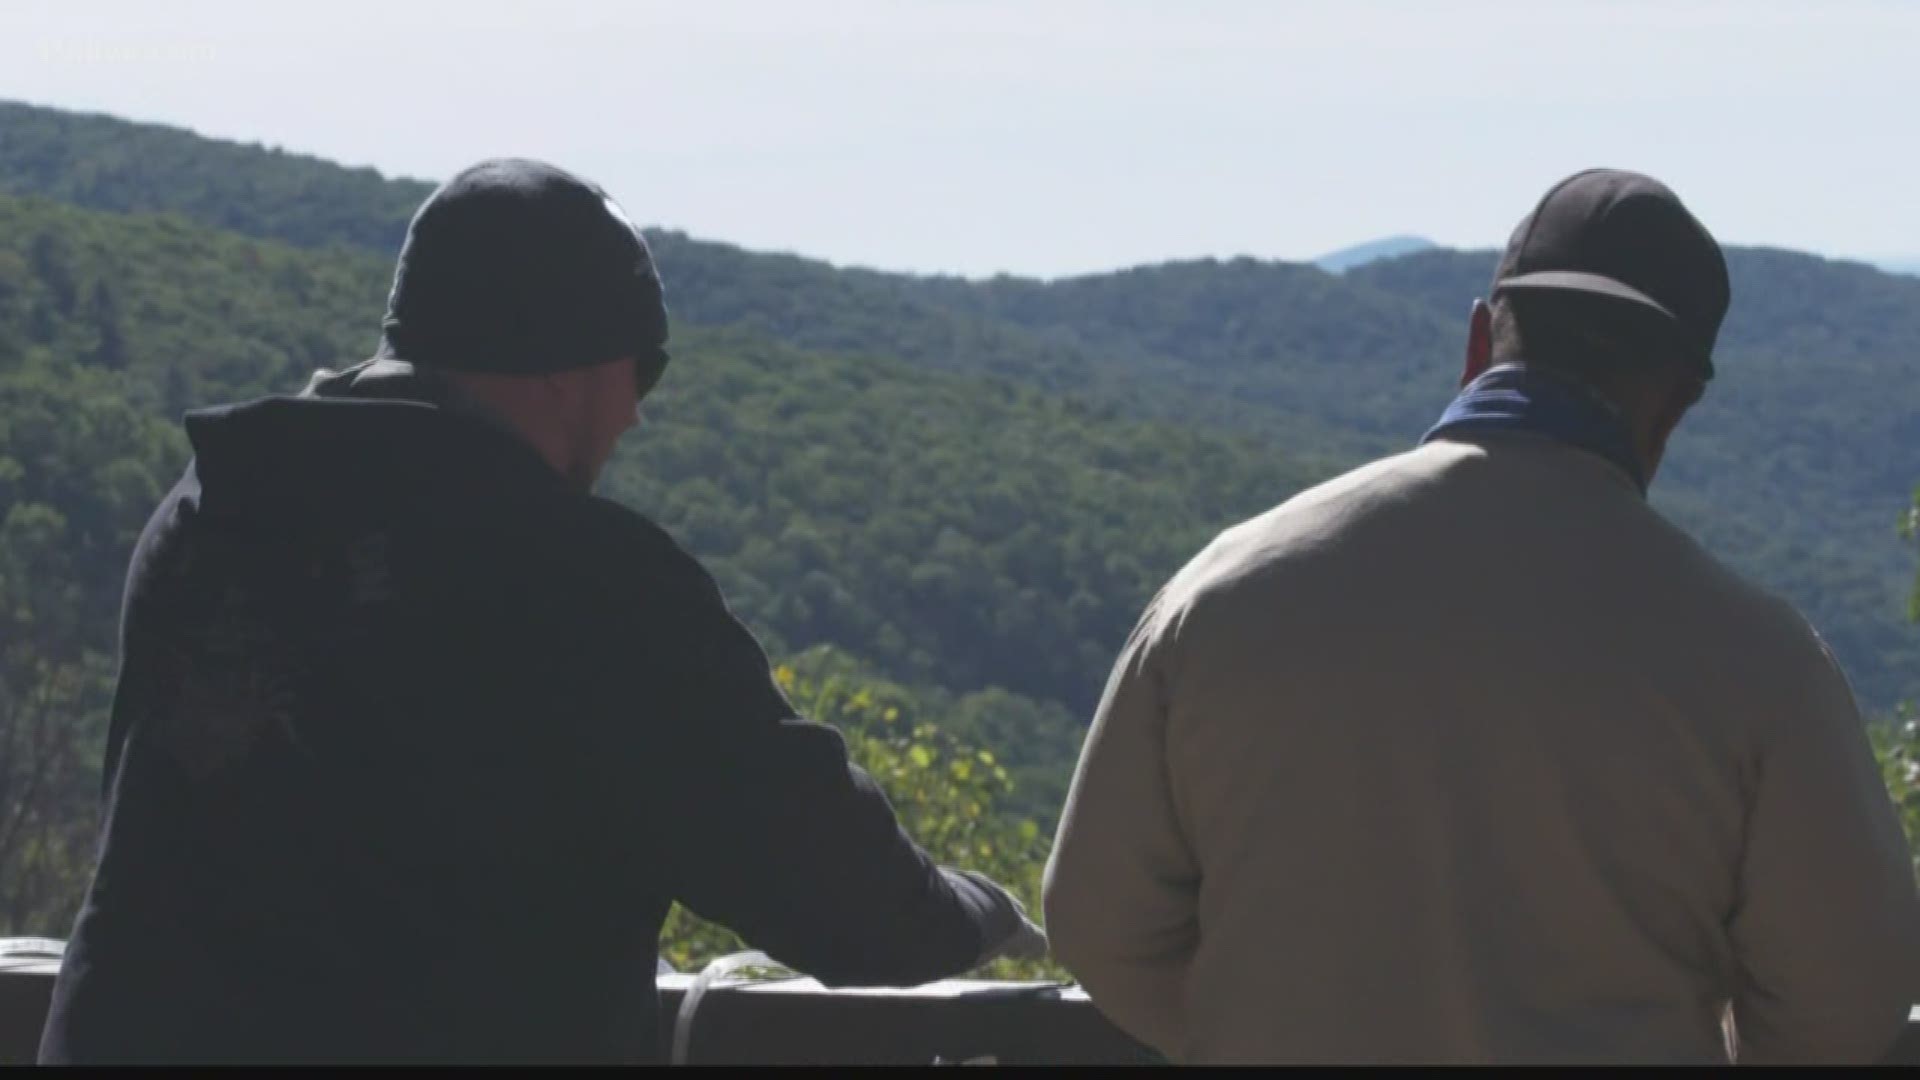 A program uses nature to help wounded warriors cope with PTSD.